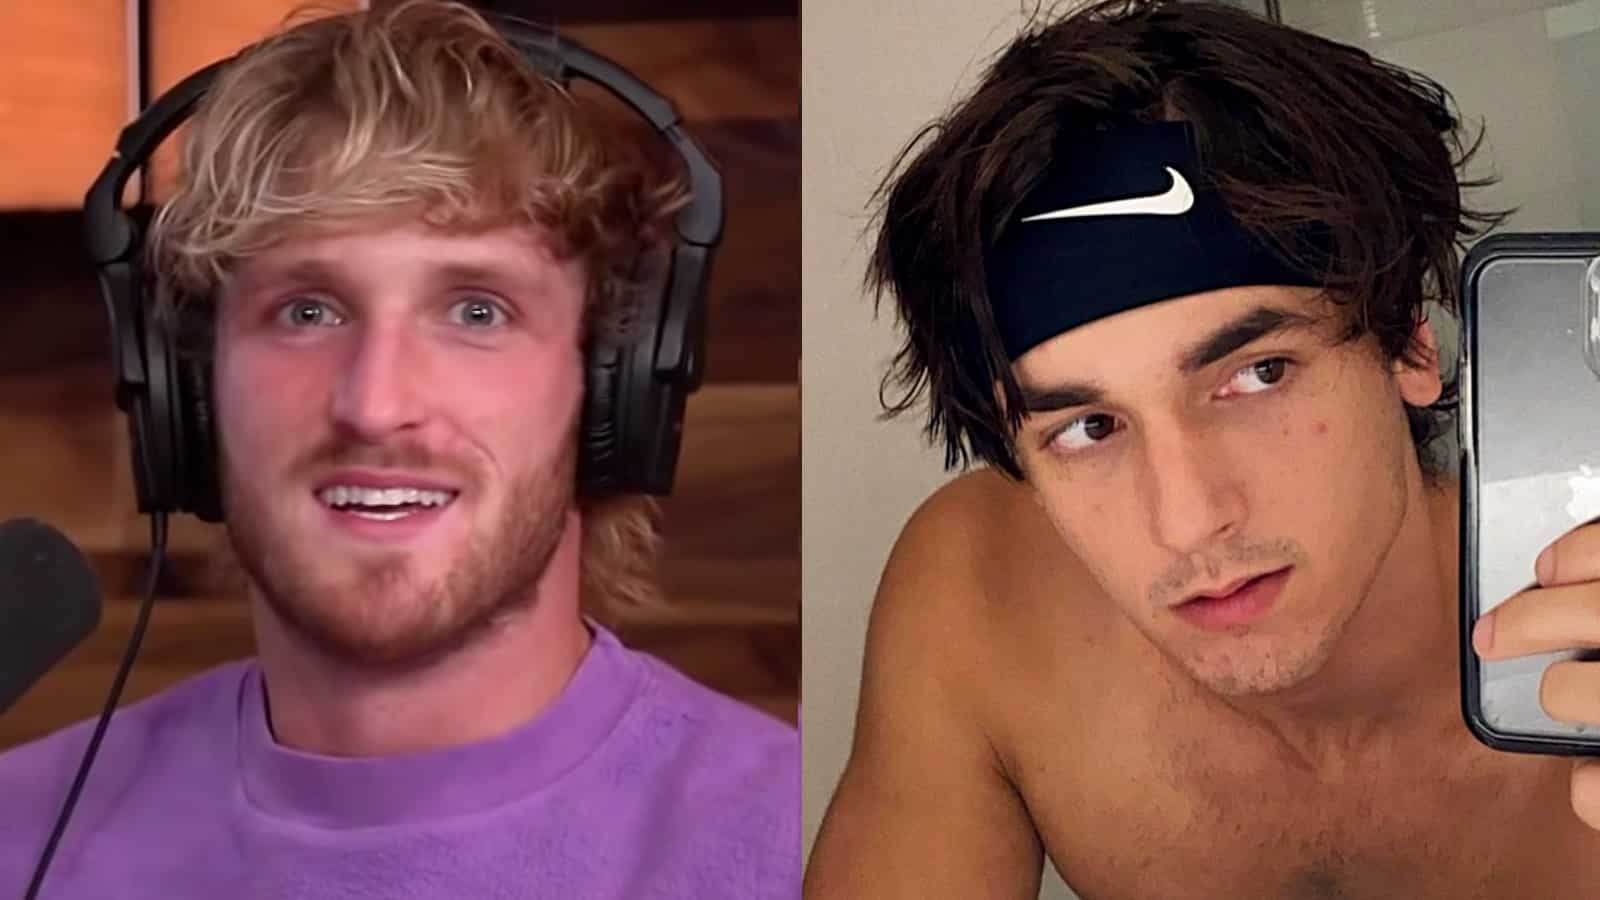 Logan Paul in image next to Bryce Hall